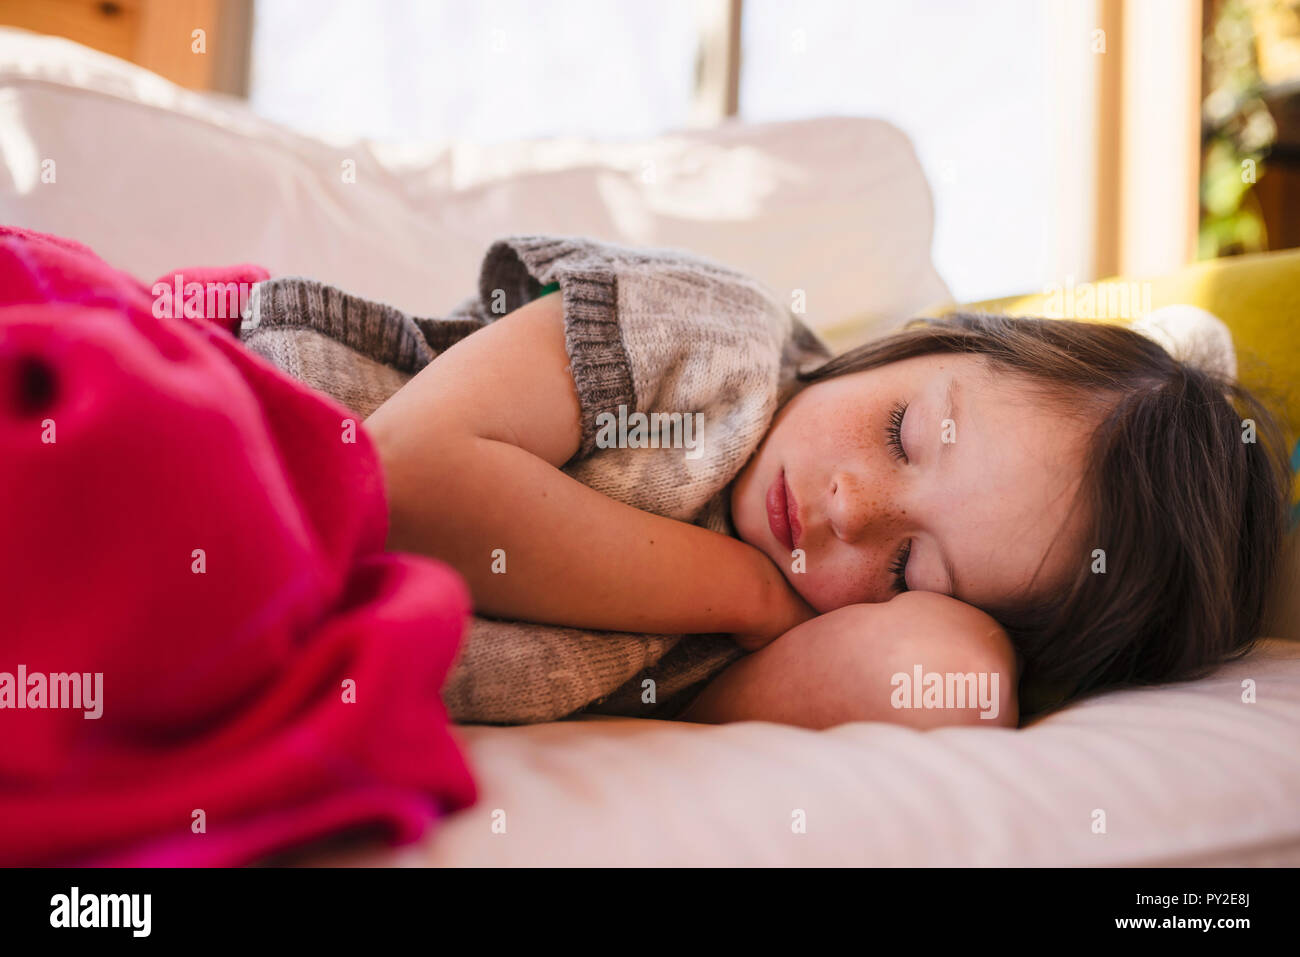 Portrait of a girl having a nap Stock Photo